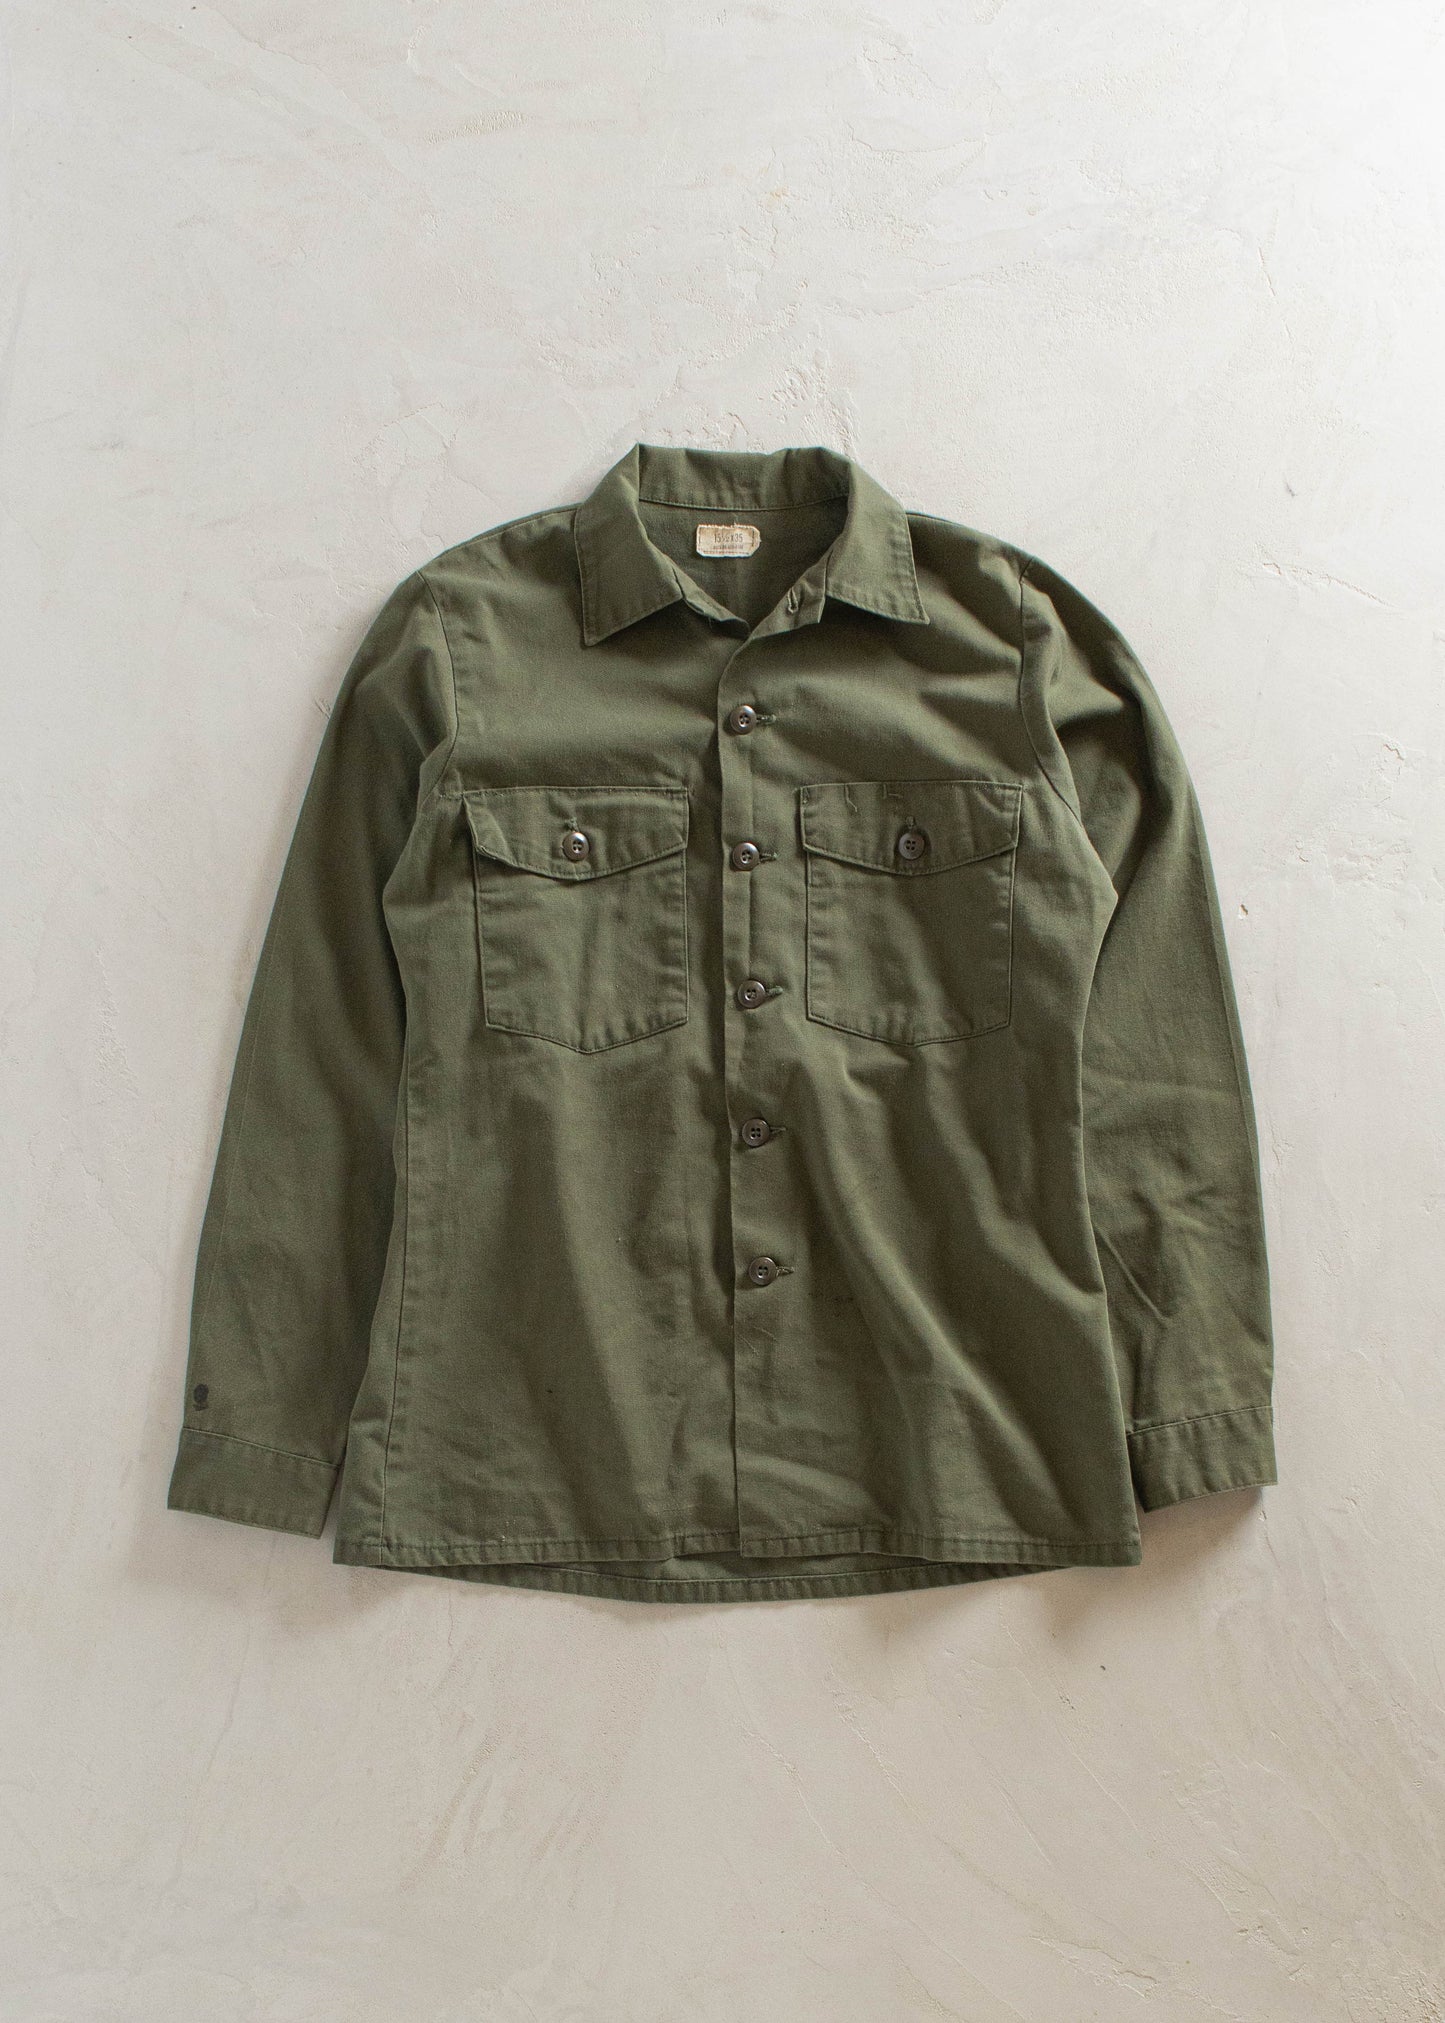 1970s OG 507 Type lll Fatigue Shirt Size S/M